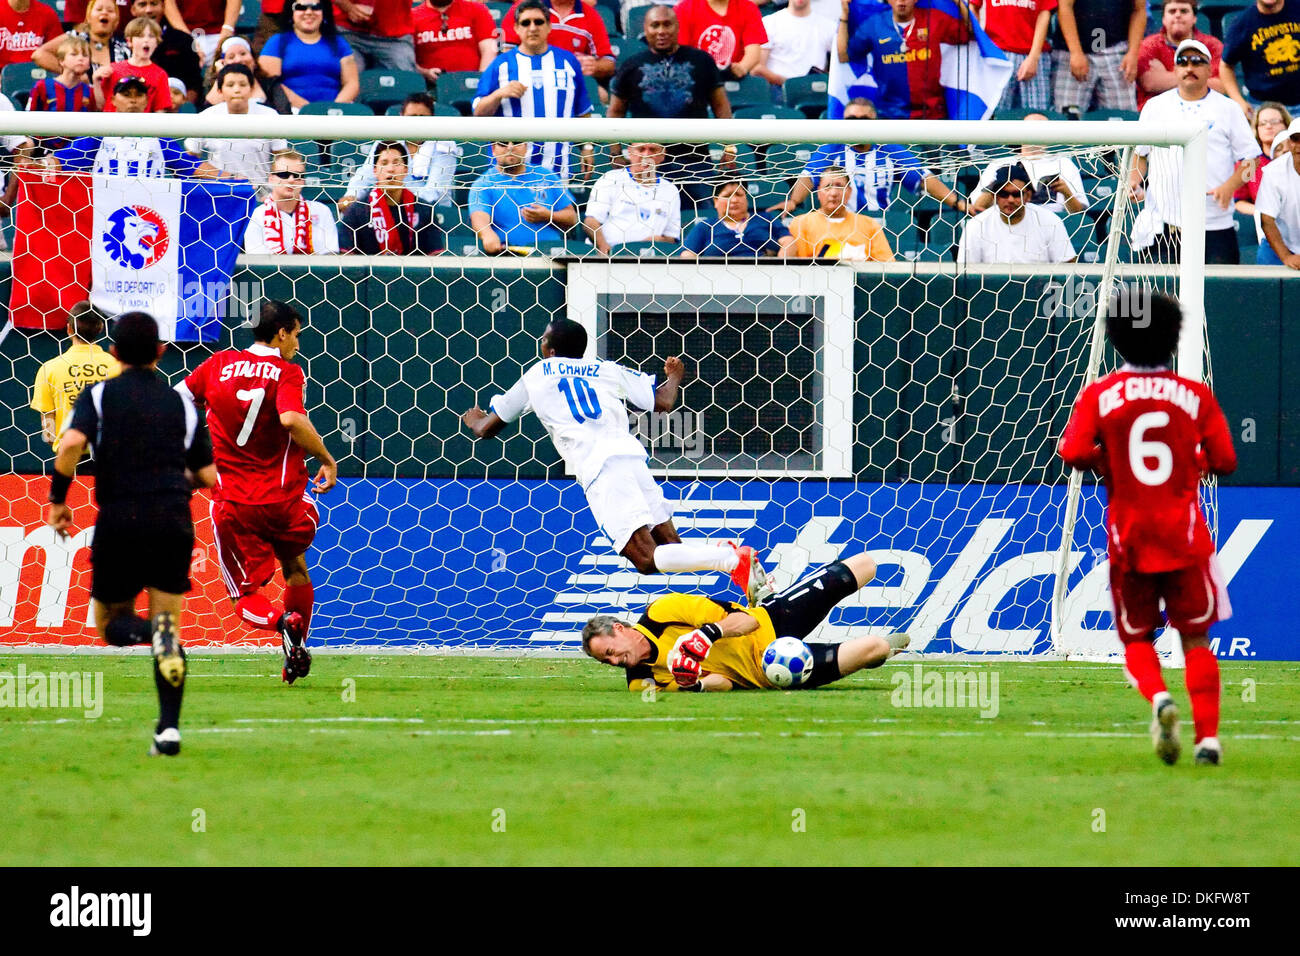 Jul 18, 2009 - Philadelphia, Pennsylvania, USA - Canada's goalkeeper GREG SUTTON (1) blocking the shot attempt of Honduras' attacker MARVIN CHAVEZ (10) during the CONCACAF Gold Cup quarter finals match between Canada and Honduras at Lincoln Financial Field in Philadelphia, Pennsylvania.   (Credit Image: © Christopher Szagola/Southcreek Global/ZUMA Press) Stock Photo